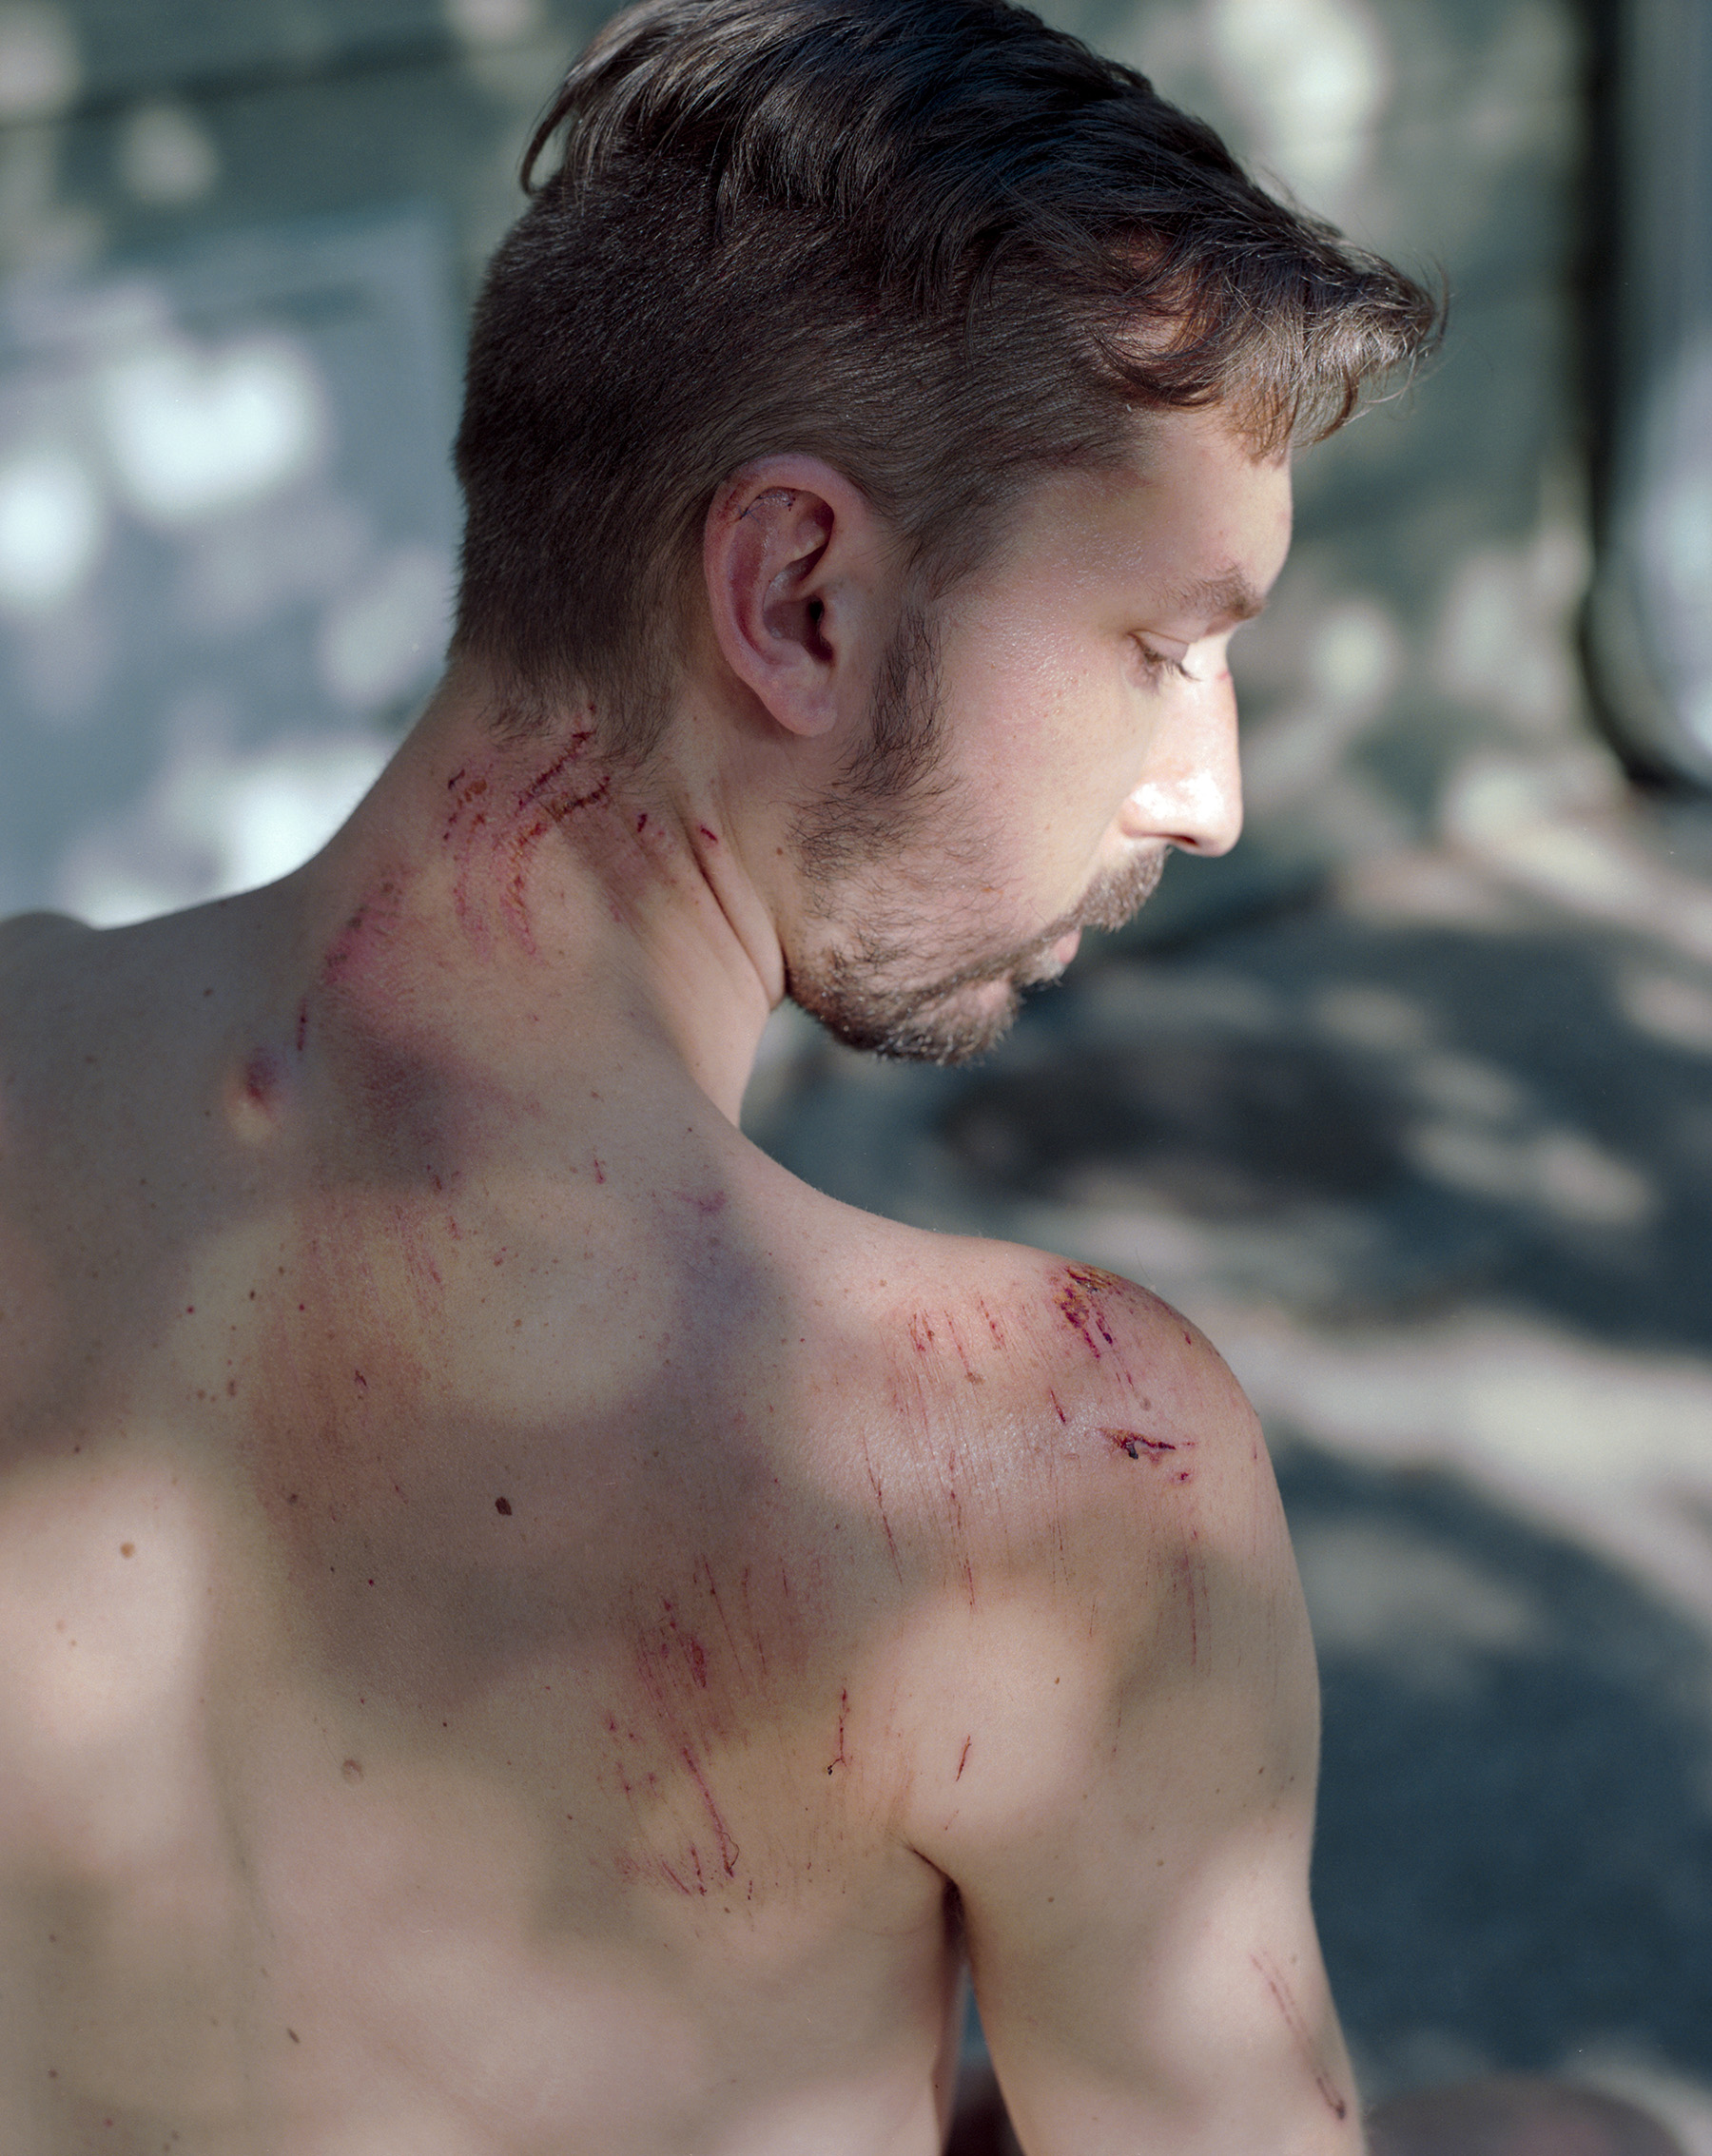 photograph of a man whose back is all scratched and bloody